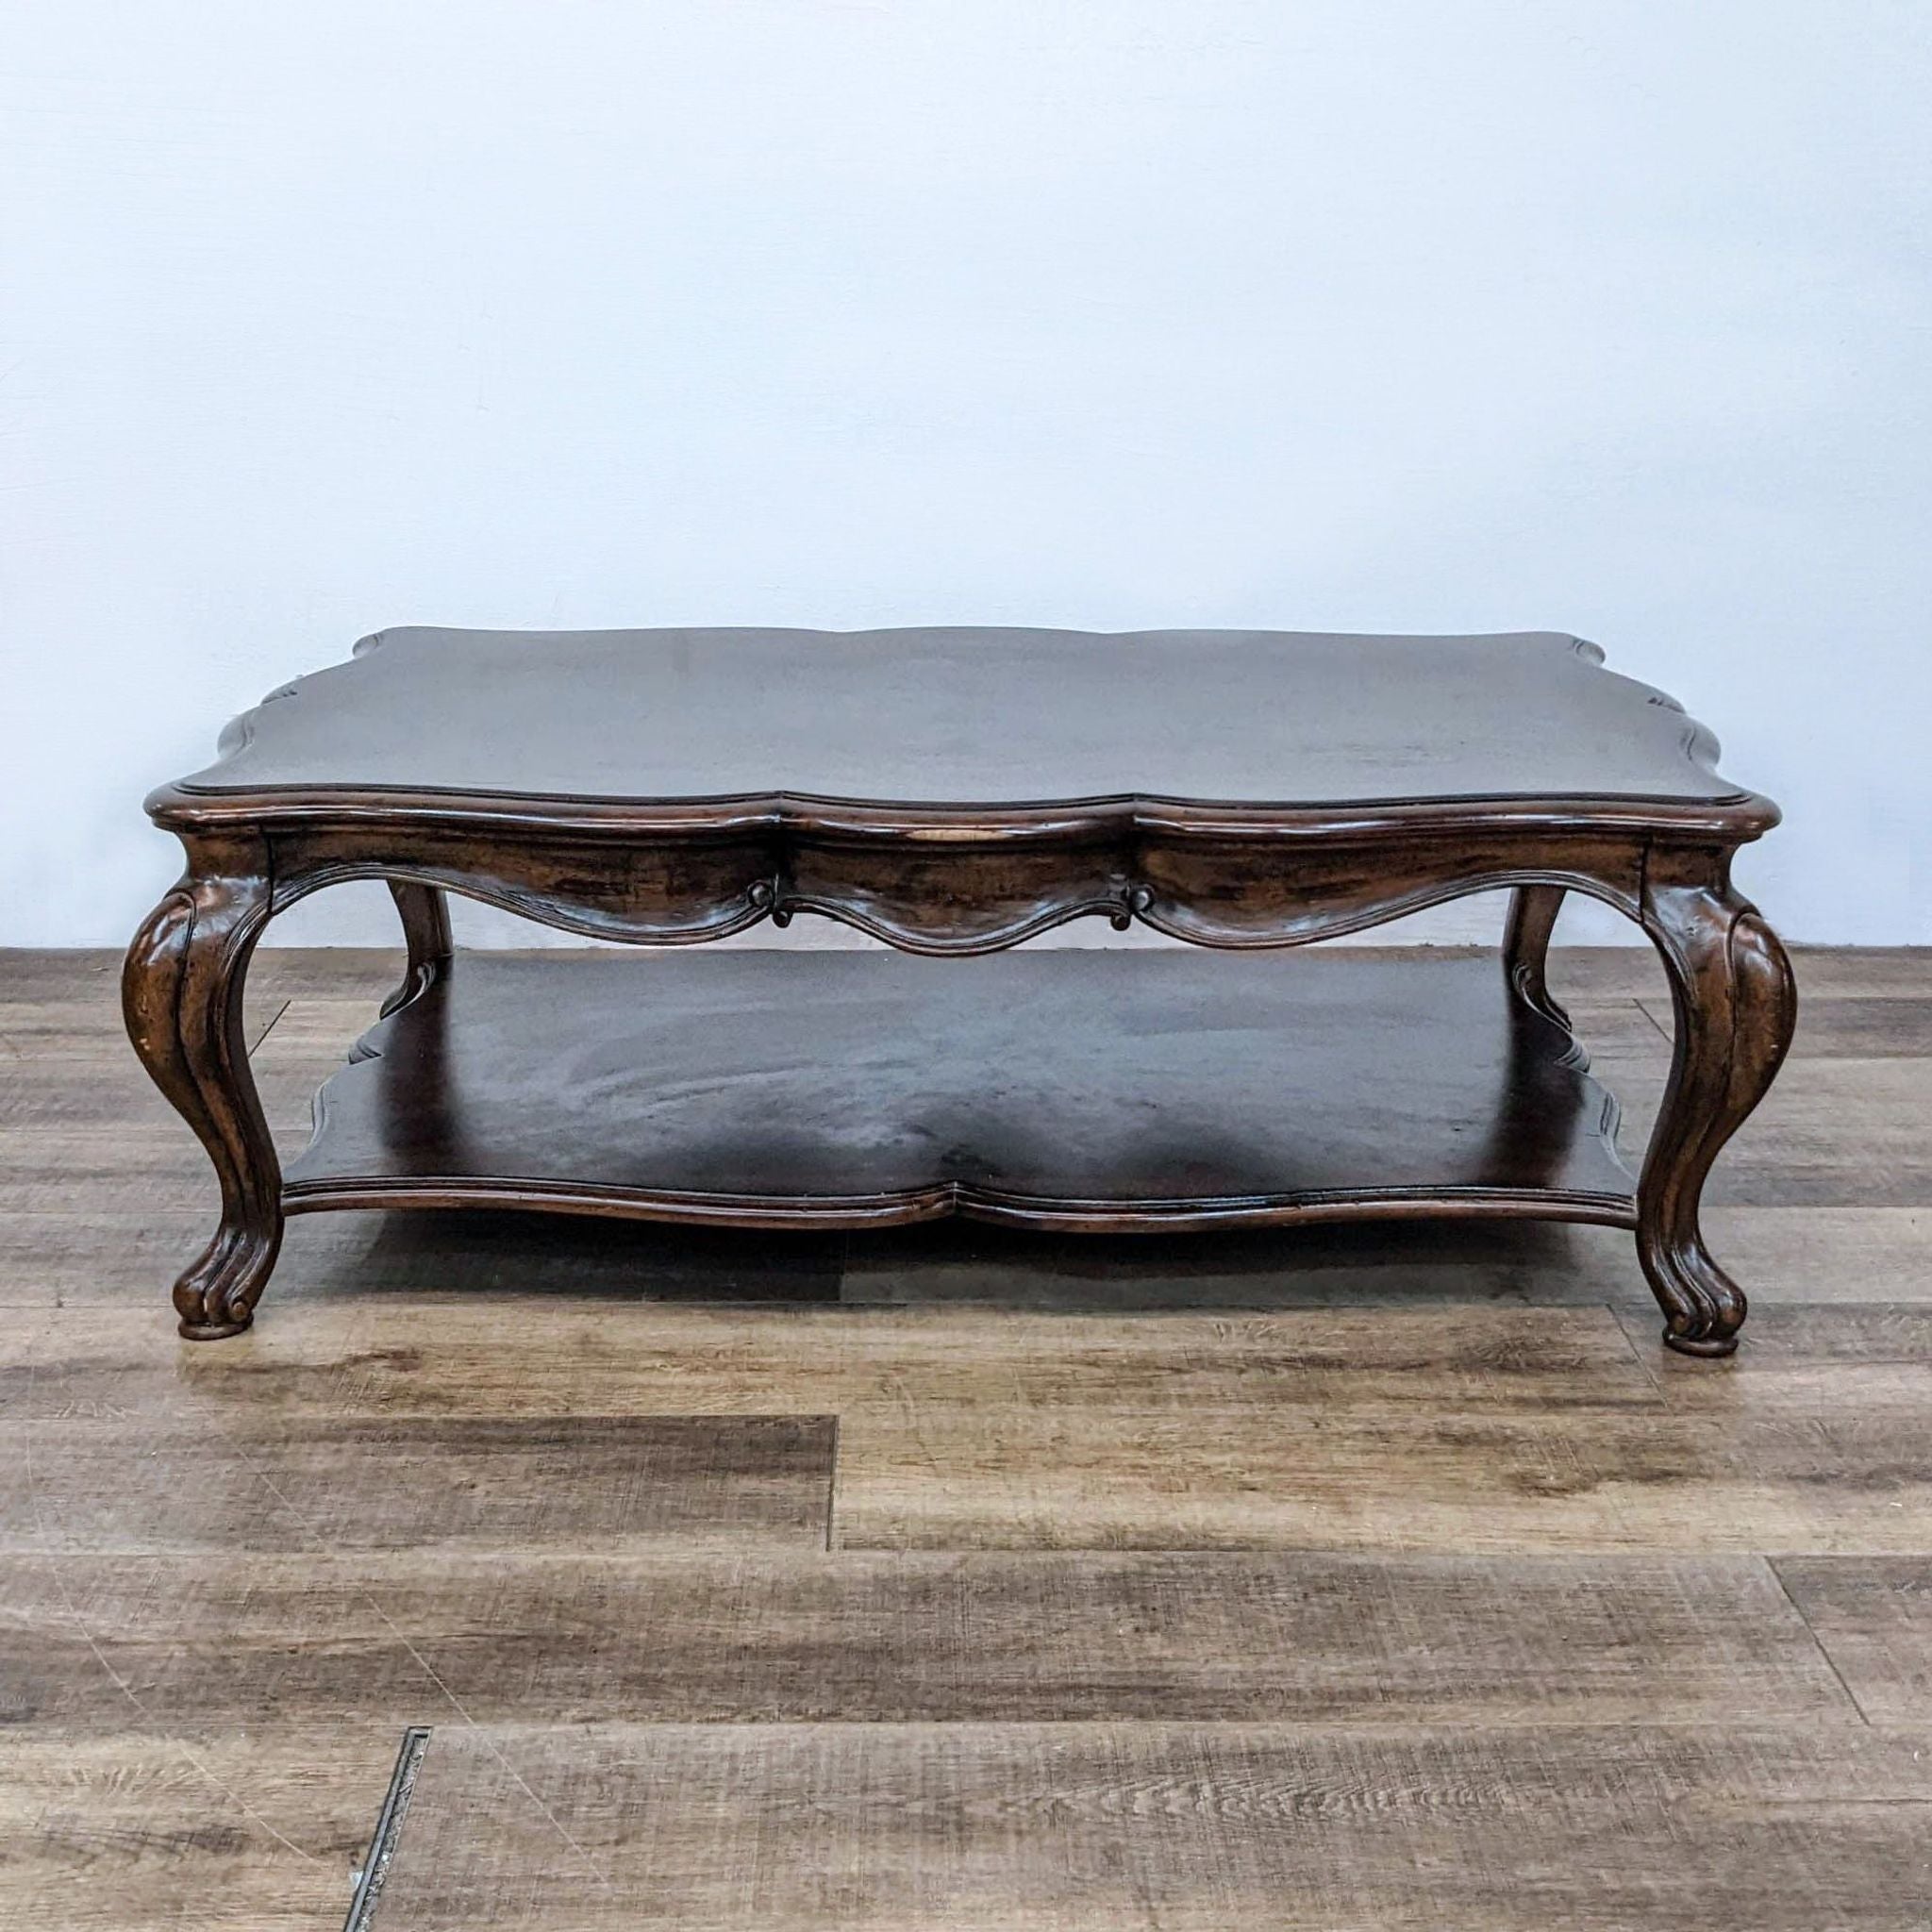 Thomasville serpentine coffee table with elegant cabriole legs and inlaid wood top design.